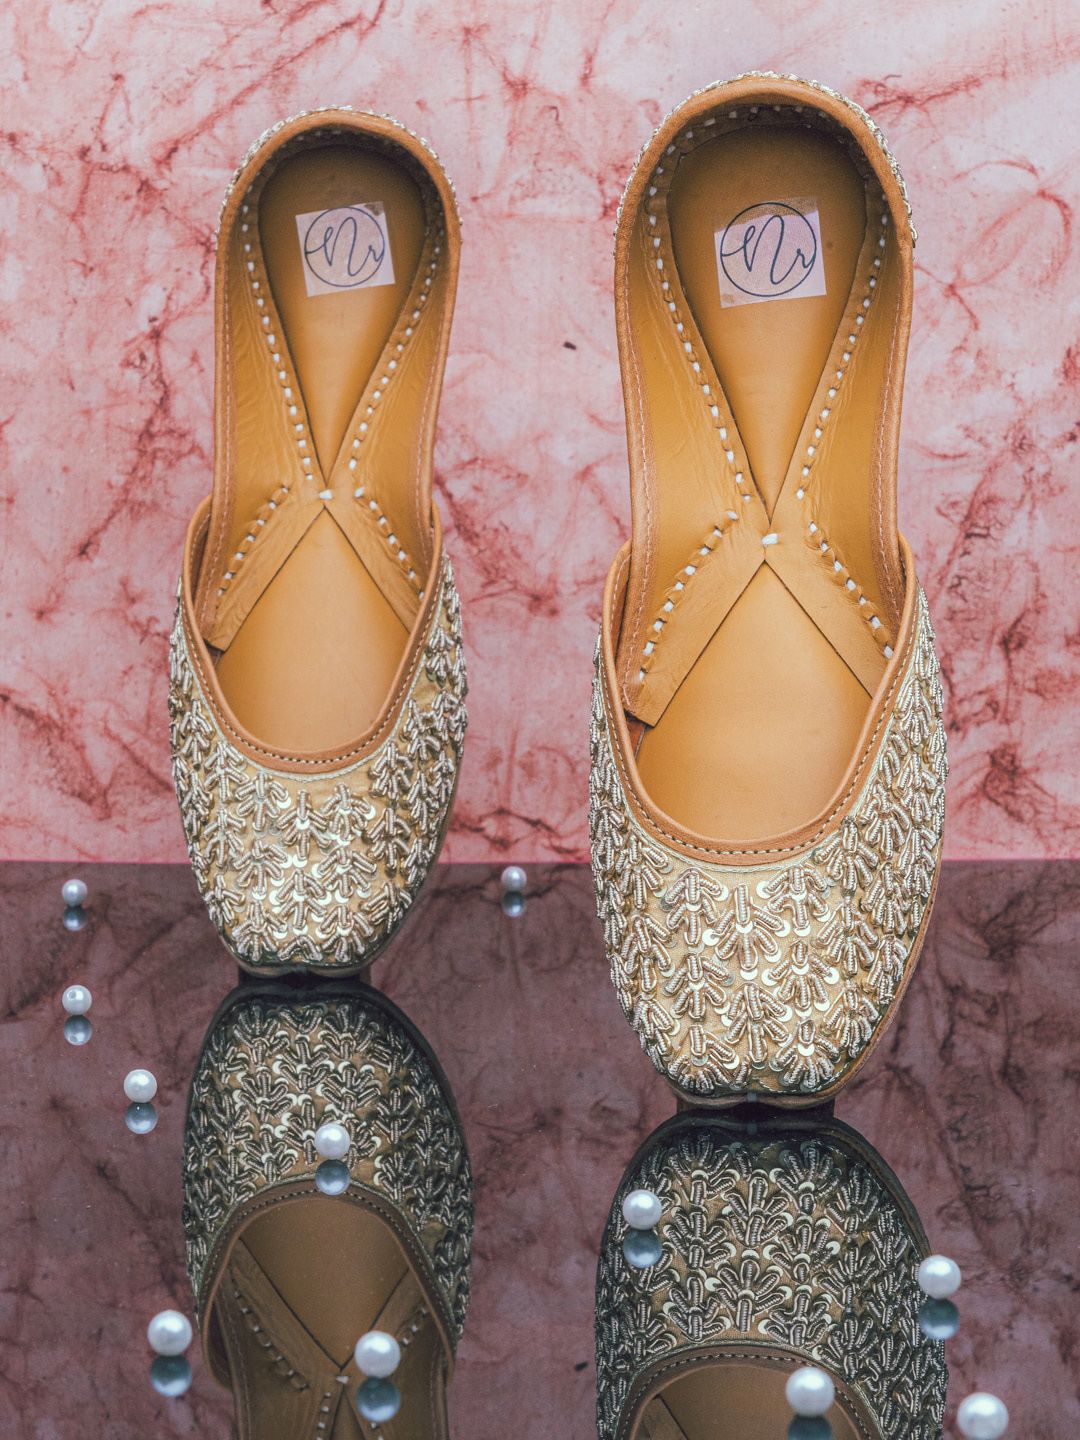 NR By Nidhi Rathi Women Gold-Toned Mojaris Flats Price in India